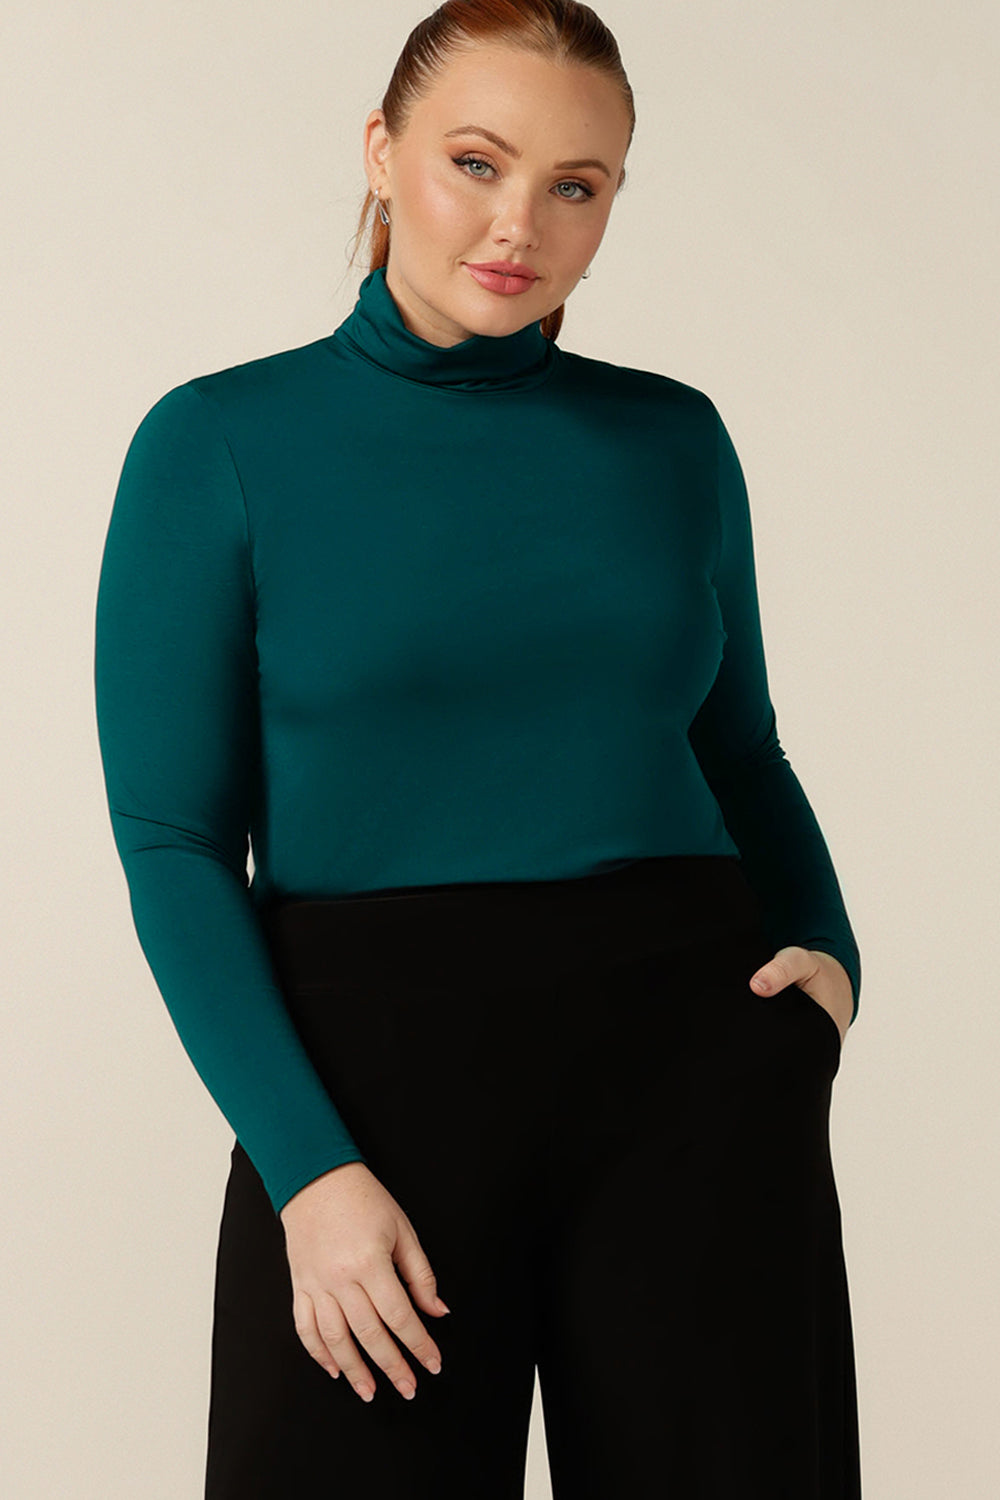 A size 12 curvy woman wears a long sleeve turtle neck top in Petrol green bamboo jersey. Made in Australia, this quality polo neck top styles for work and corporate wear.